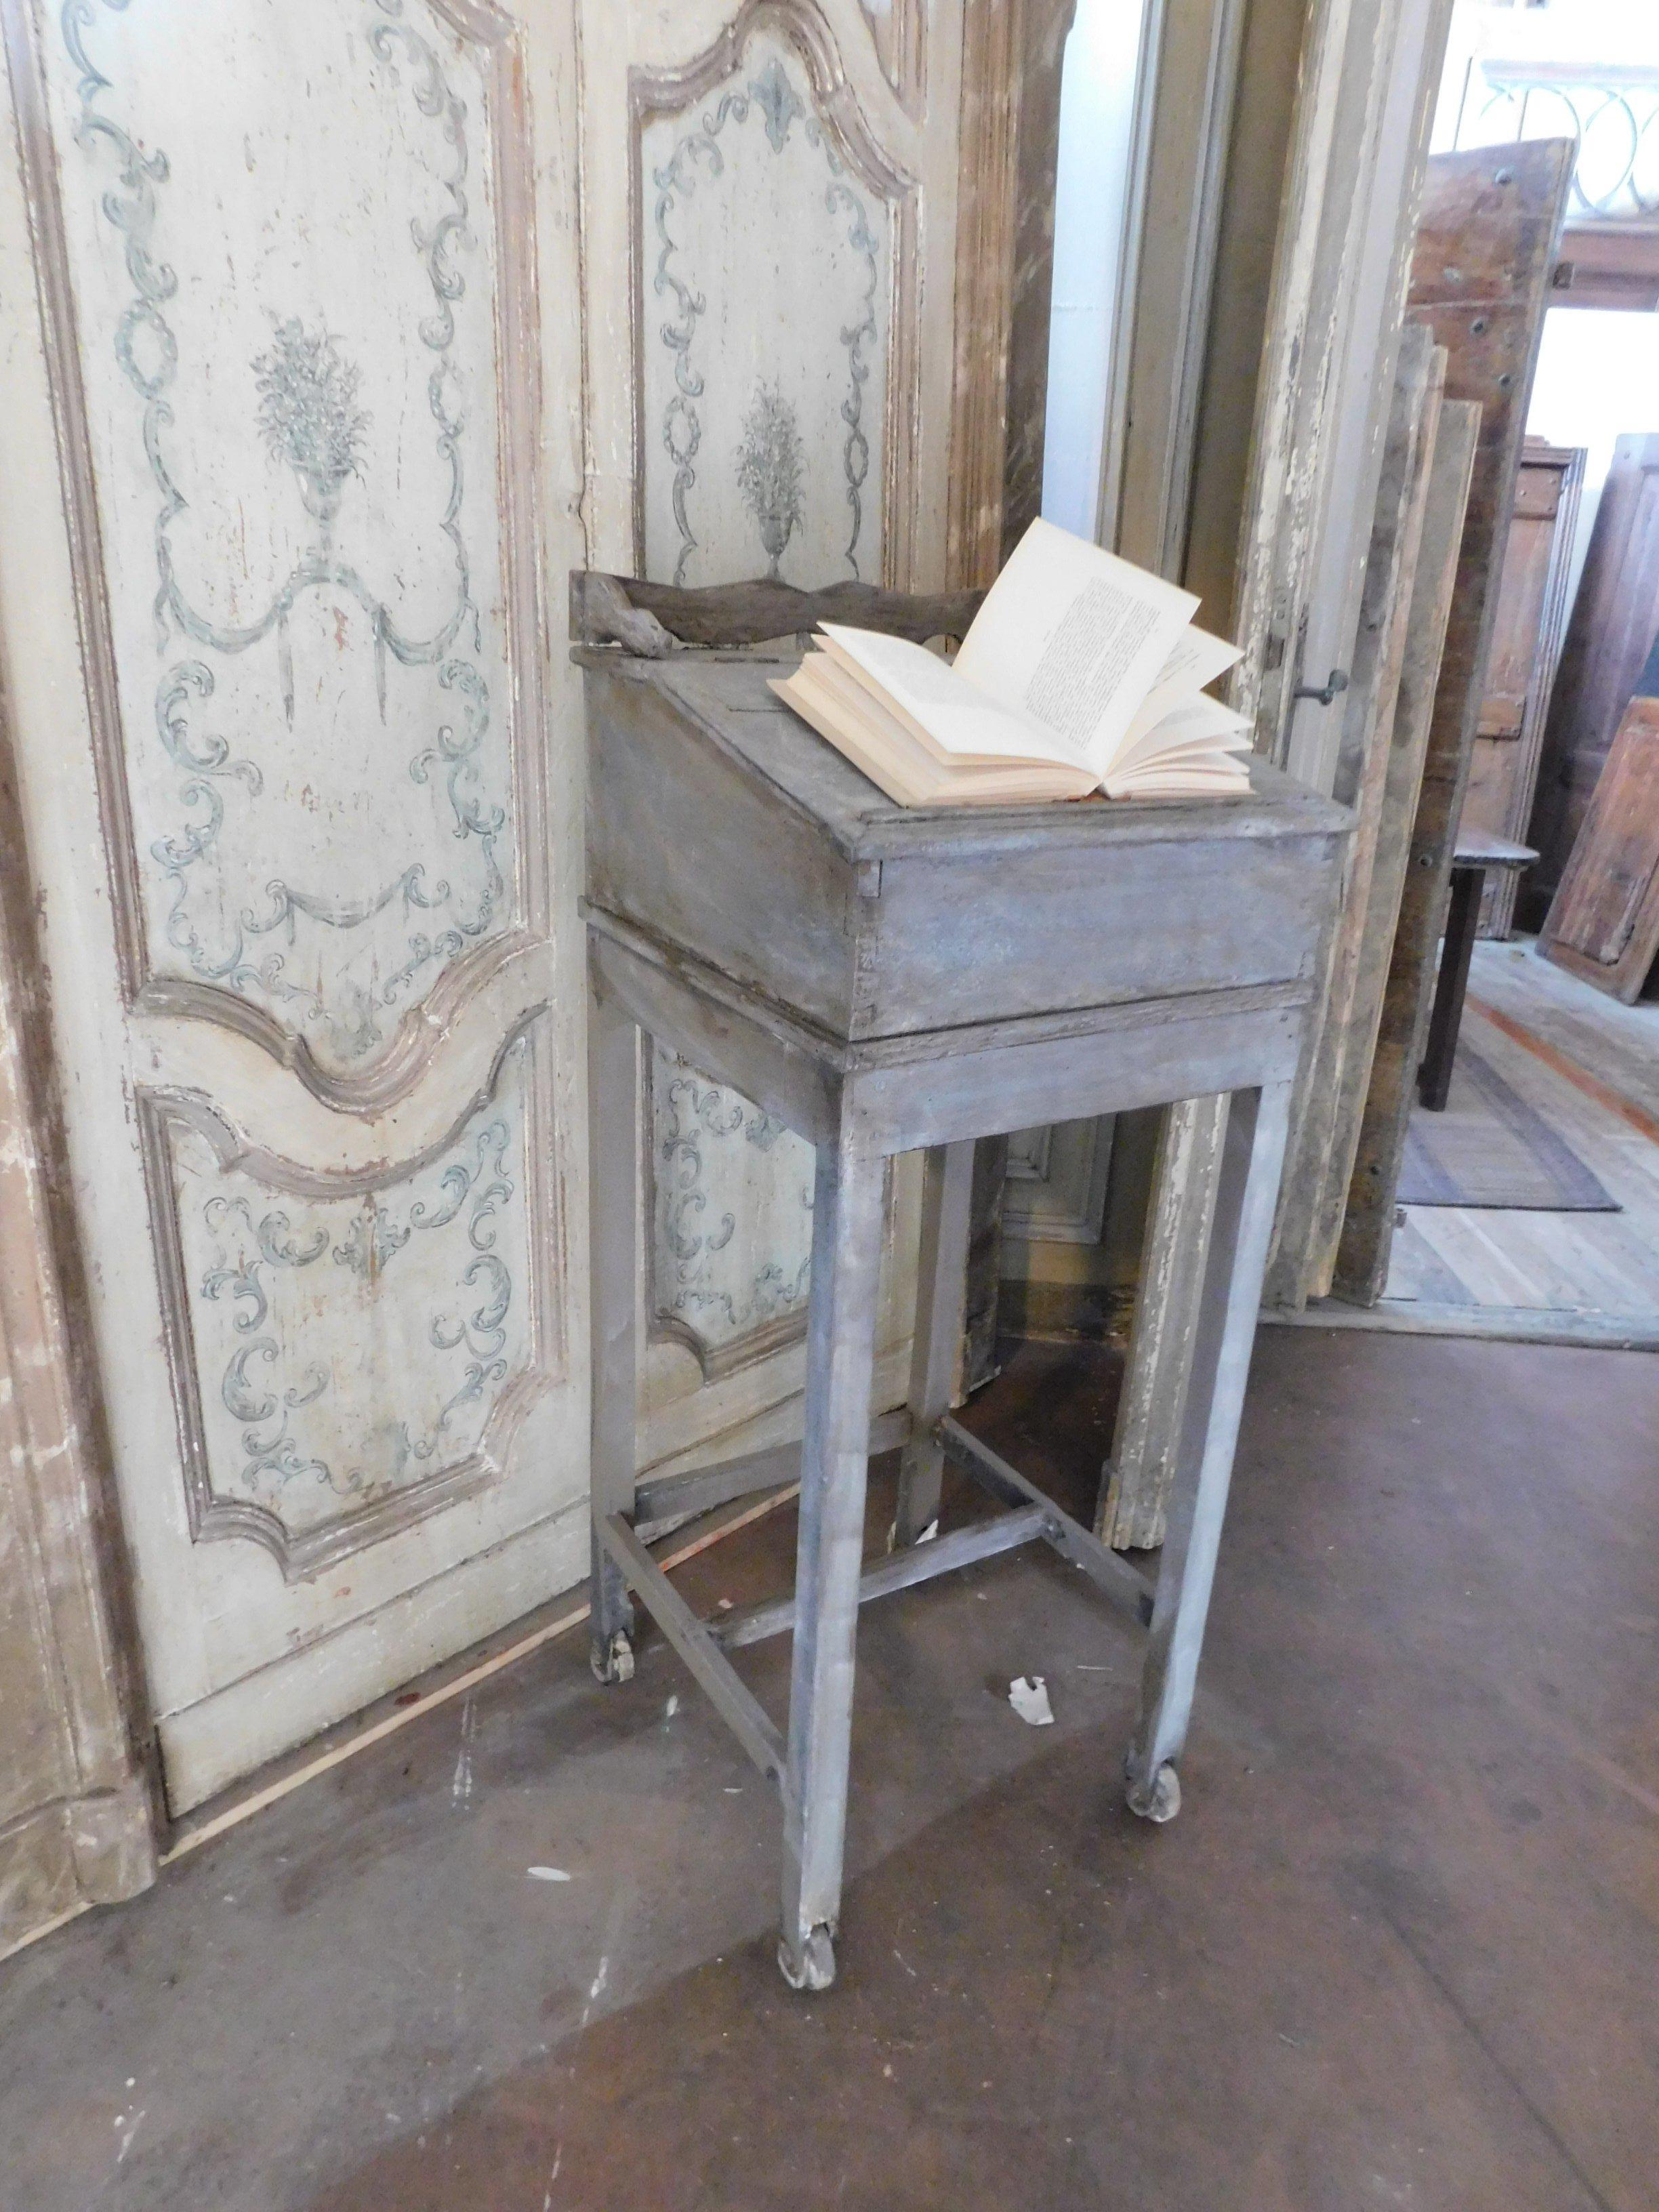 Antique gray lacquered wooden lectern, with inclined bookcase drawer, handcrafted in Italy in the 1900s, original lacquer, with wheels for easy handling and storage of books or documents.
Object of particular design, measuring cm length 47 x height